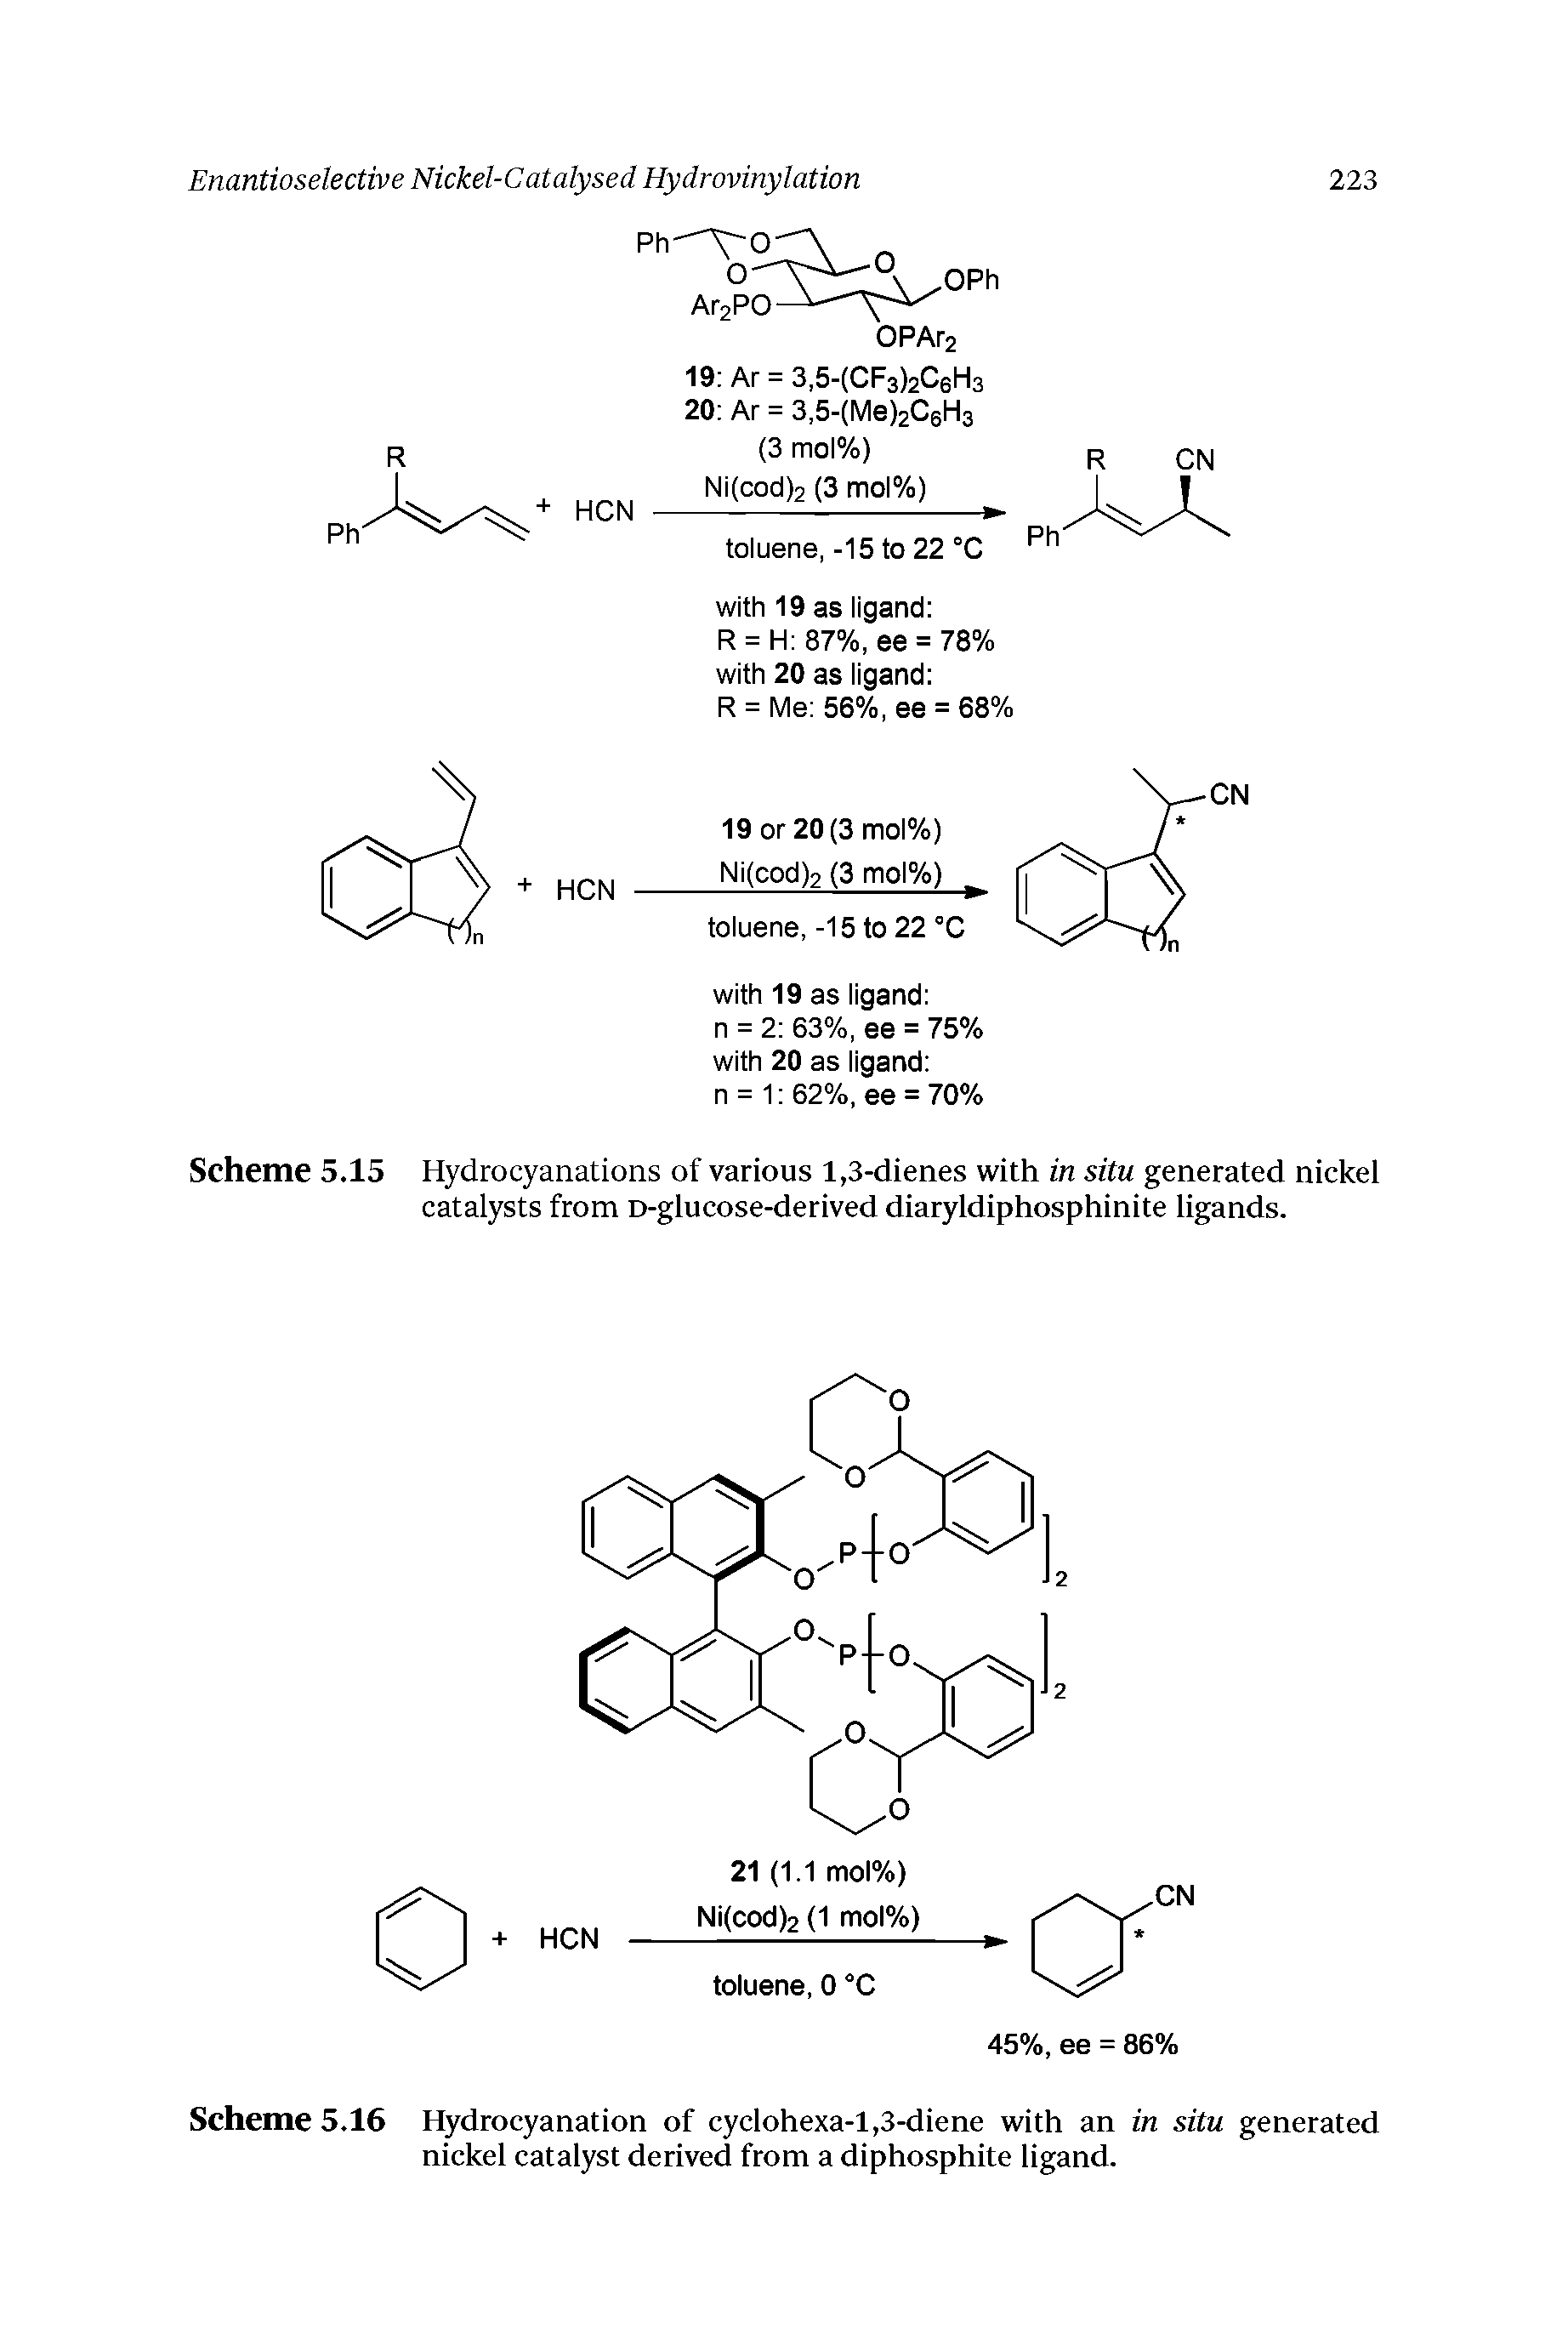 Scheme 5.16 Hydrocyanation of cyclohexa-1,3-diene with an in situ generated nickel catalyst derived from a diphosphite ligand.